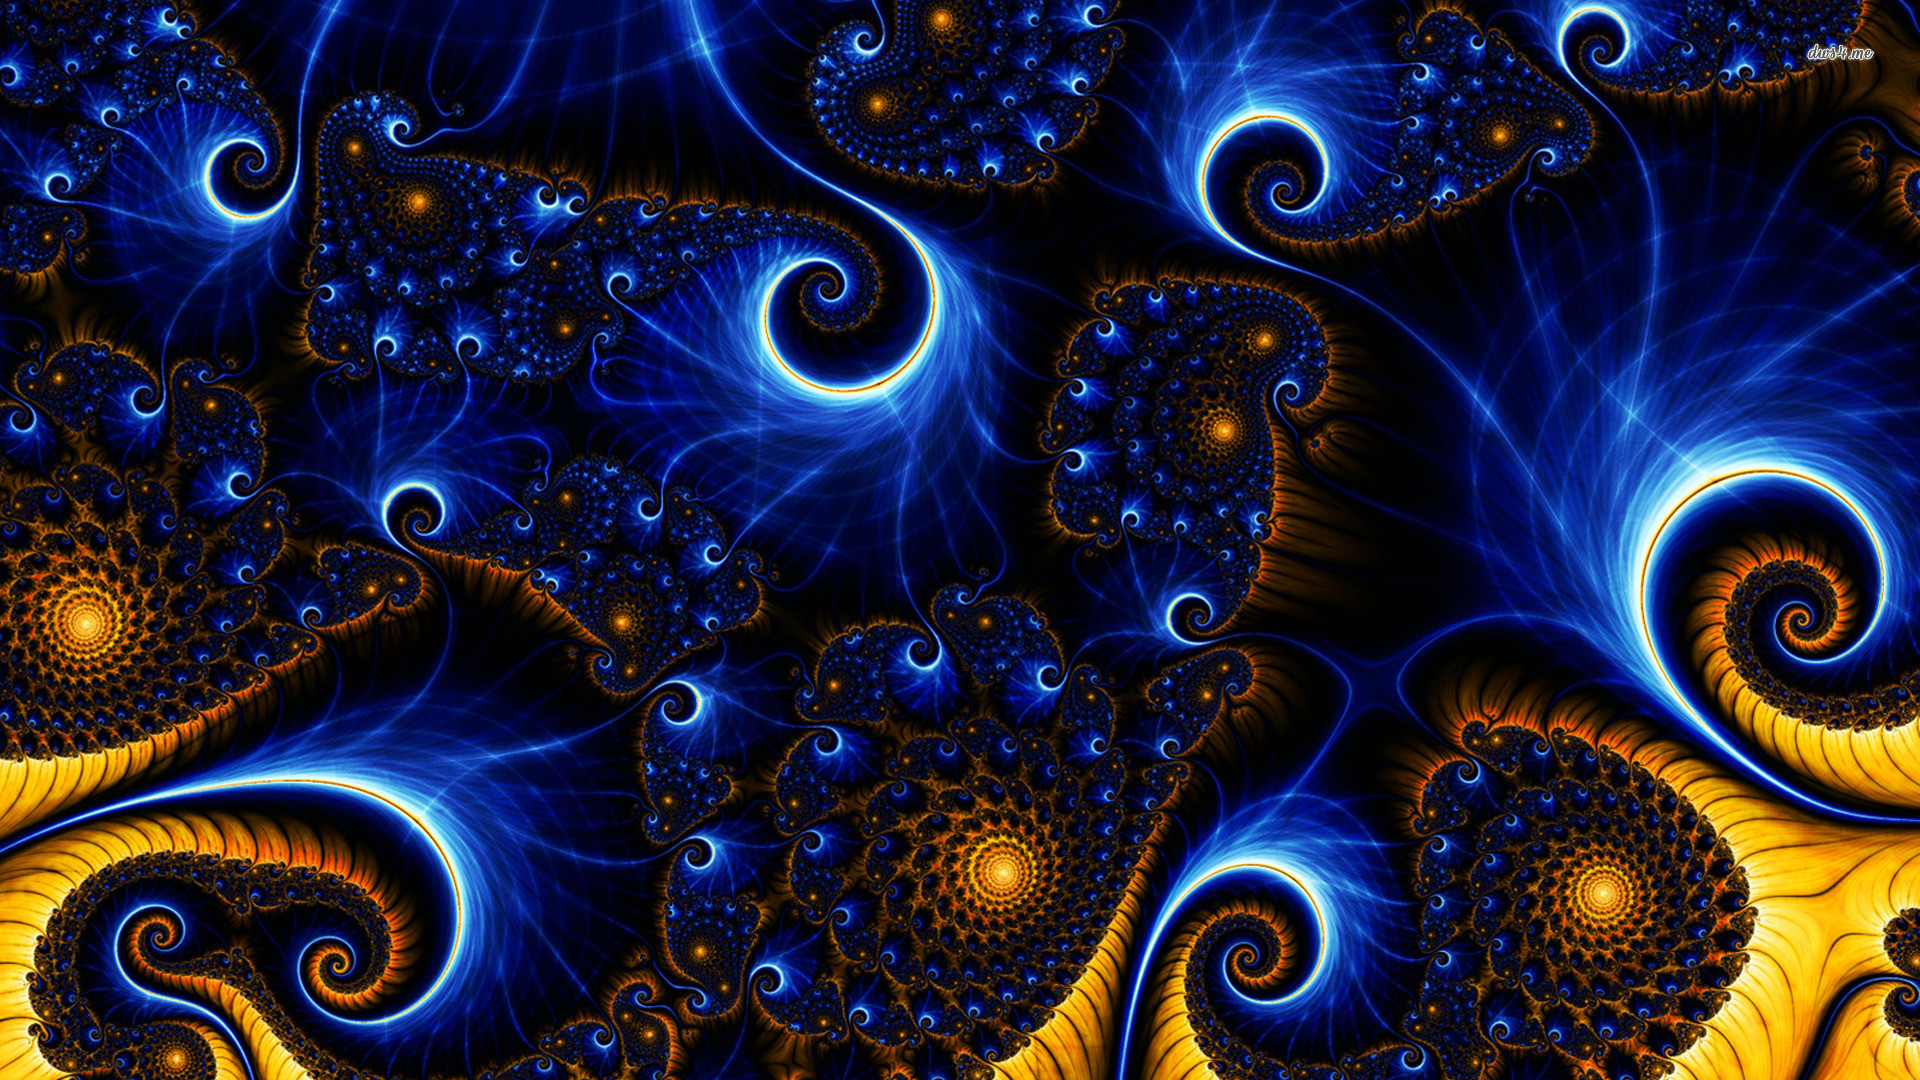 1920x1080 Straddle the Line Between Maths and Art with These Fractal Wallpapers